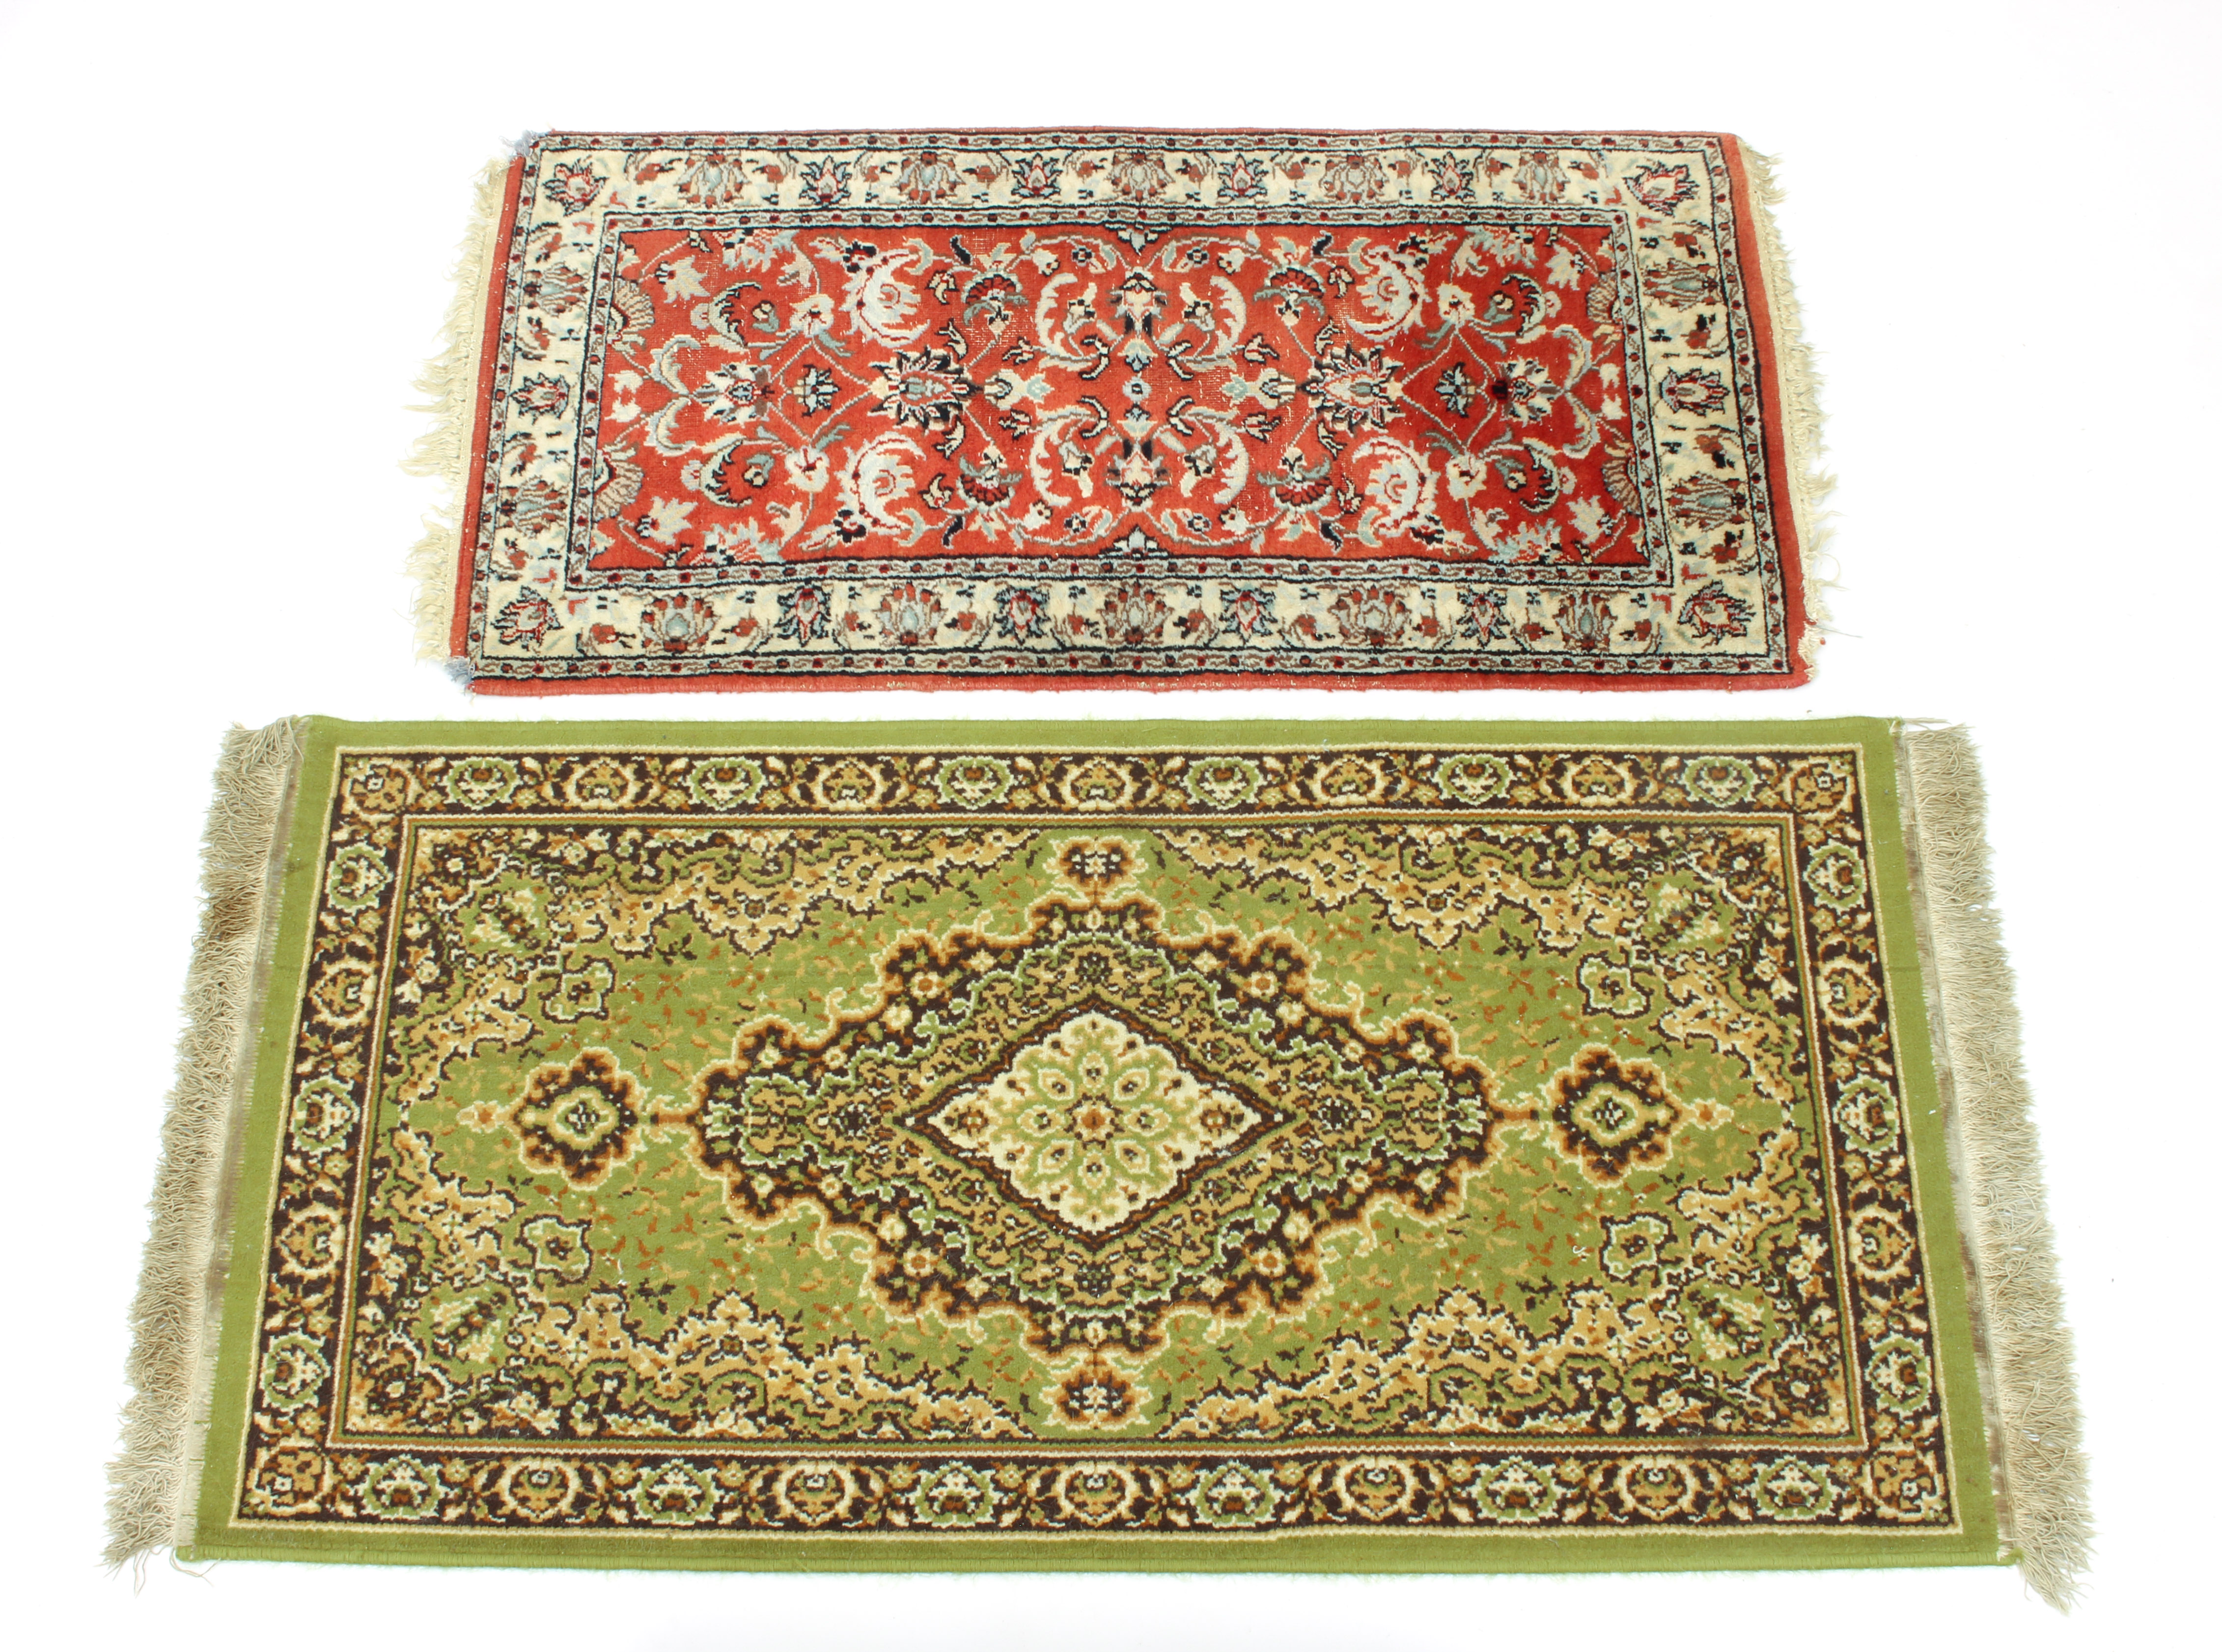 Two small wool rugs - late 20th century, one hand knotted, Persian, with all-over floral and foliate